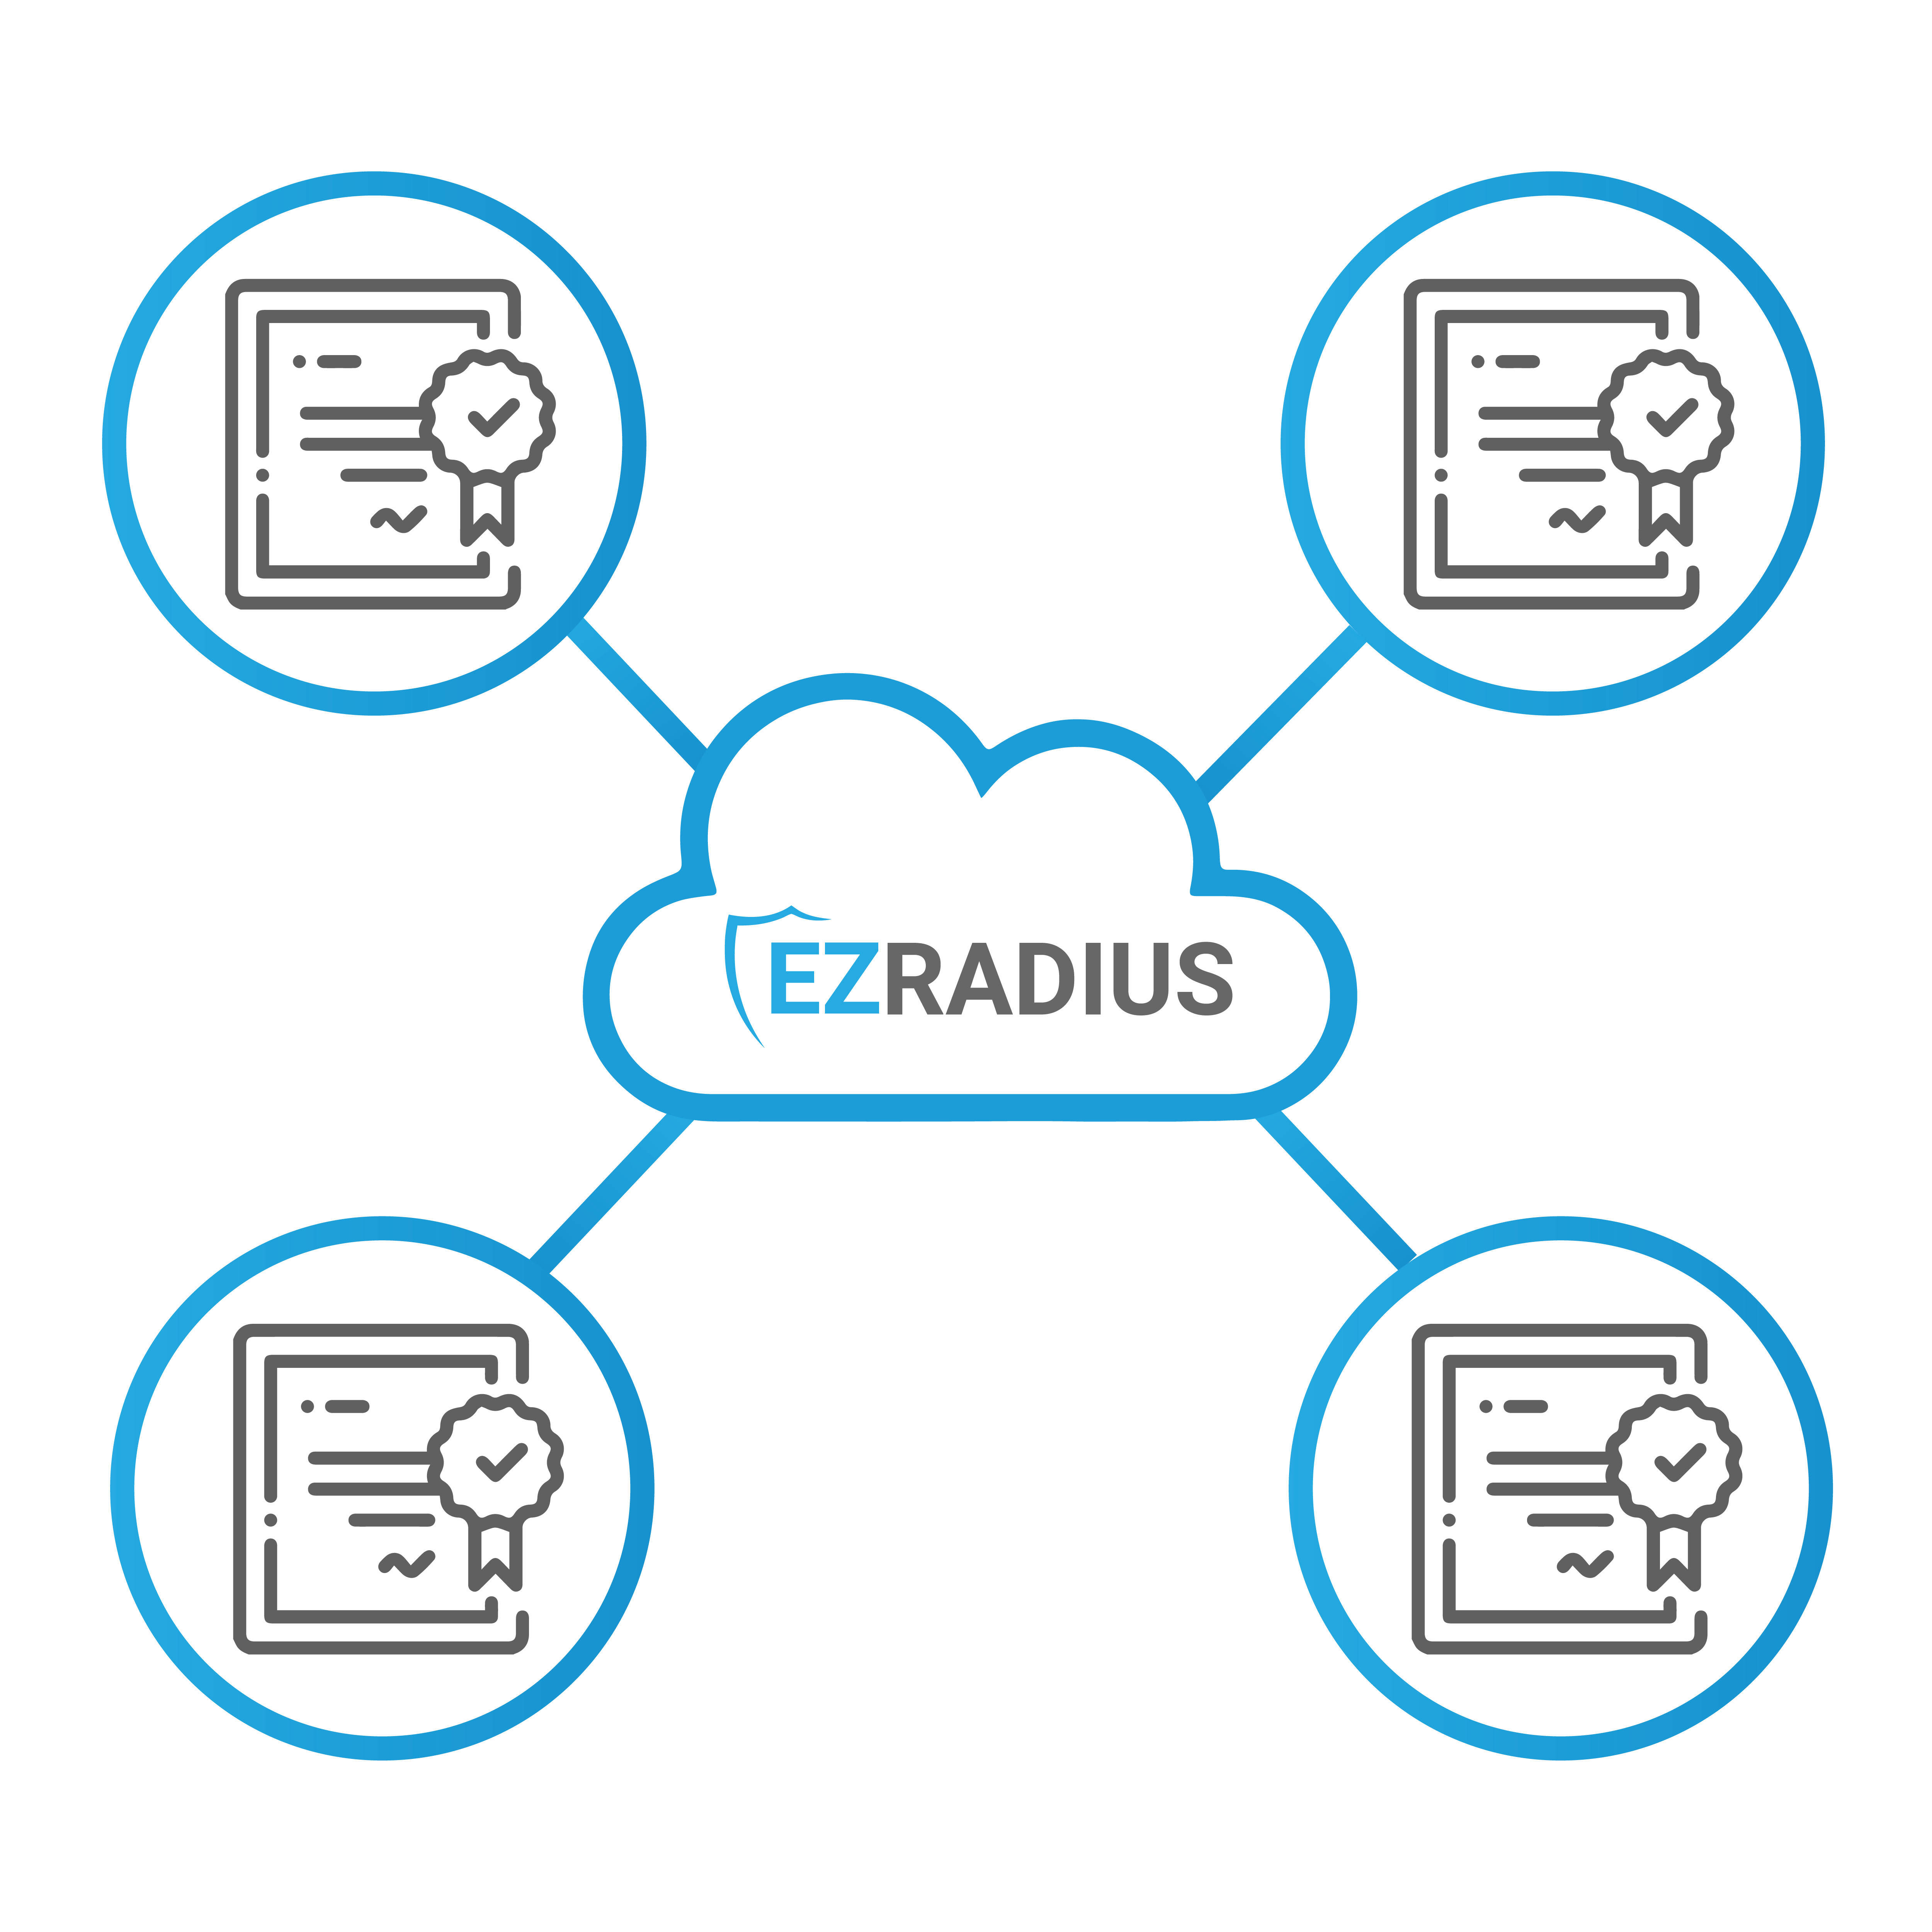 Integrate RADIUS Service with your PKI from ADCS, SCEPMAN and Microsoft Cloud PKI